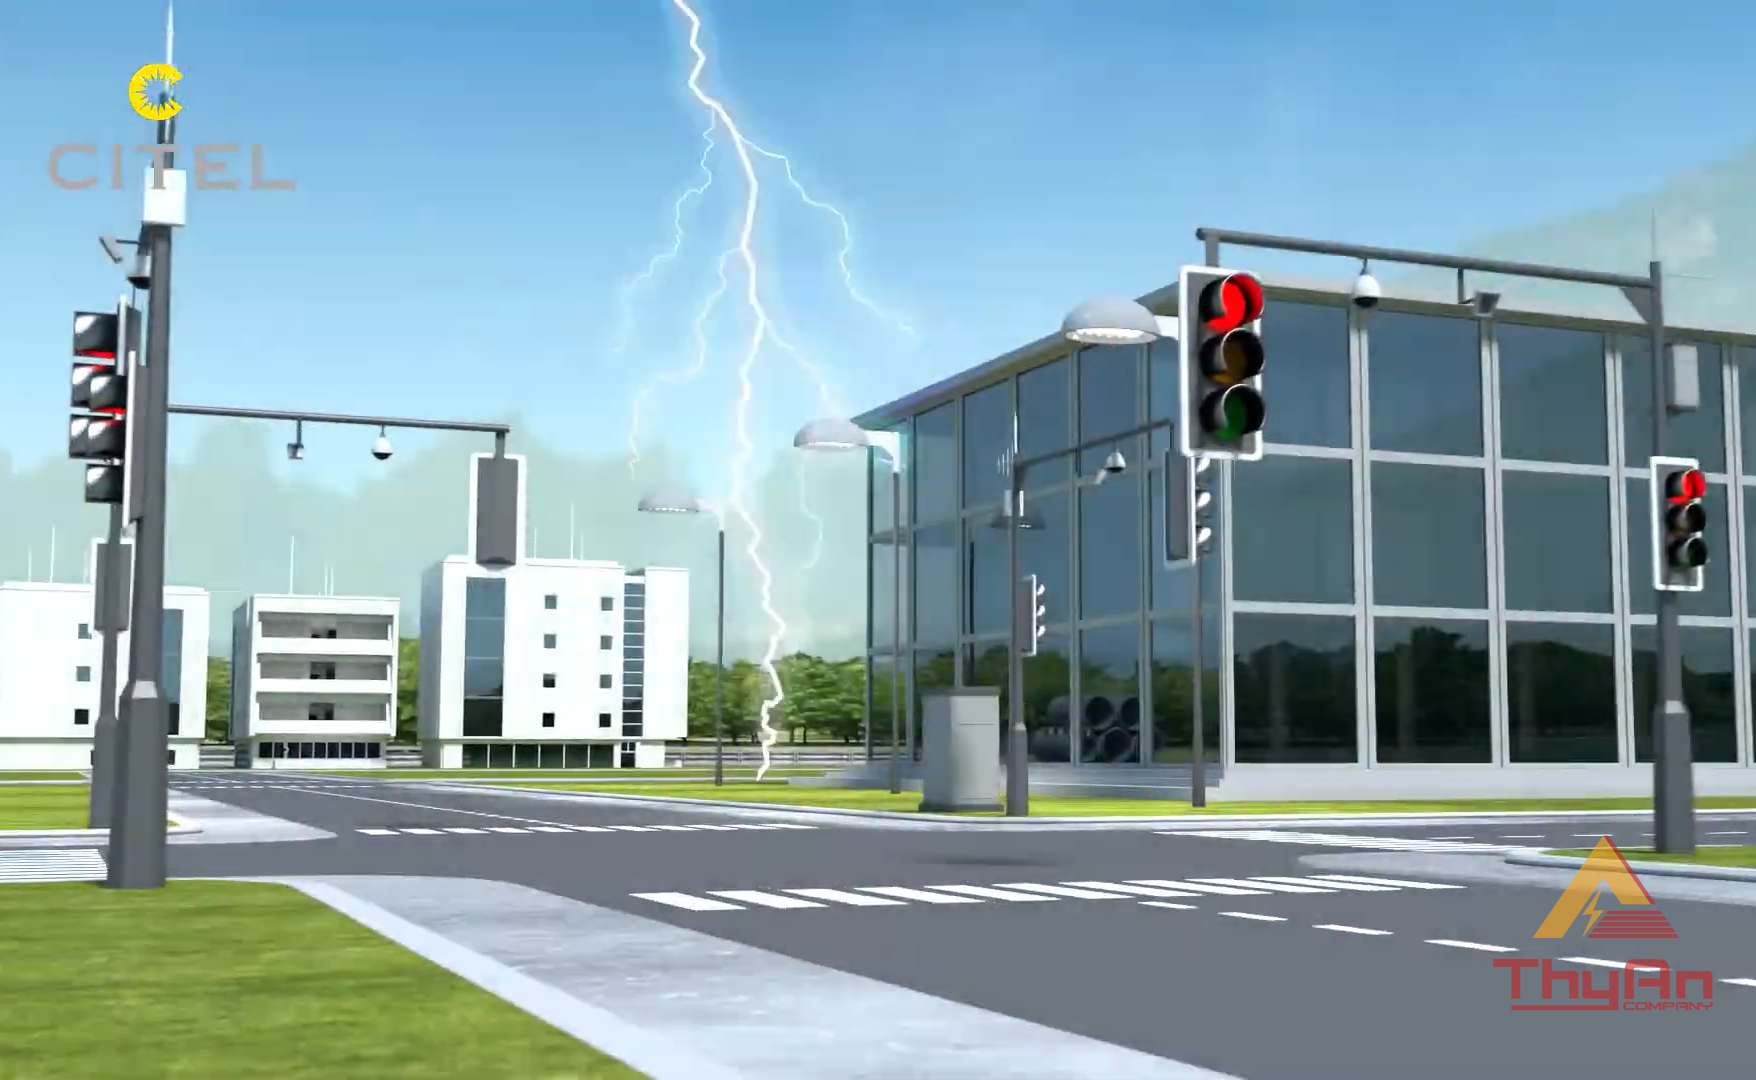 Surge Protection solution for Intelligent Transportation systems